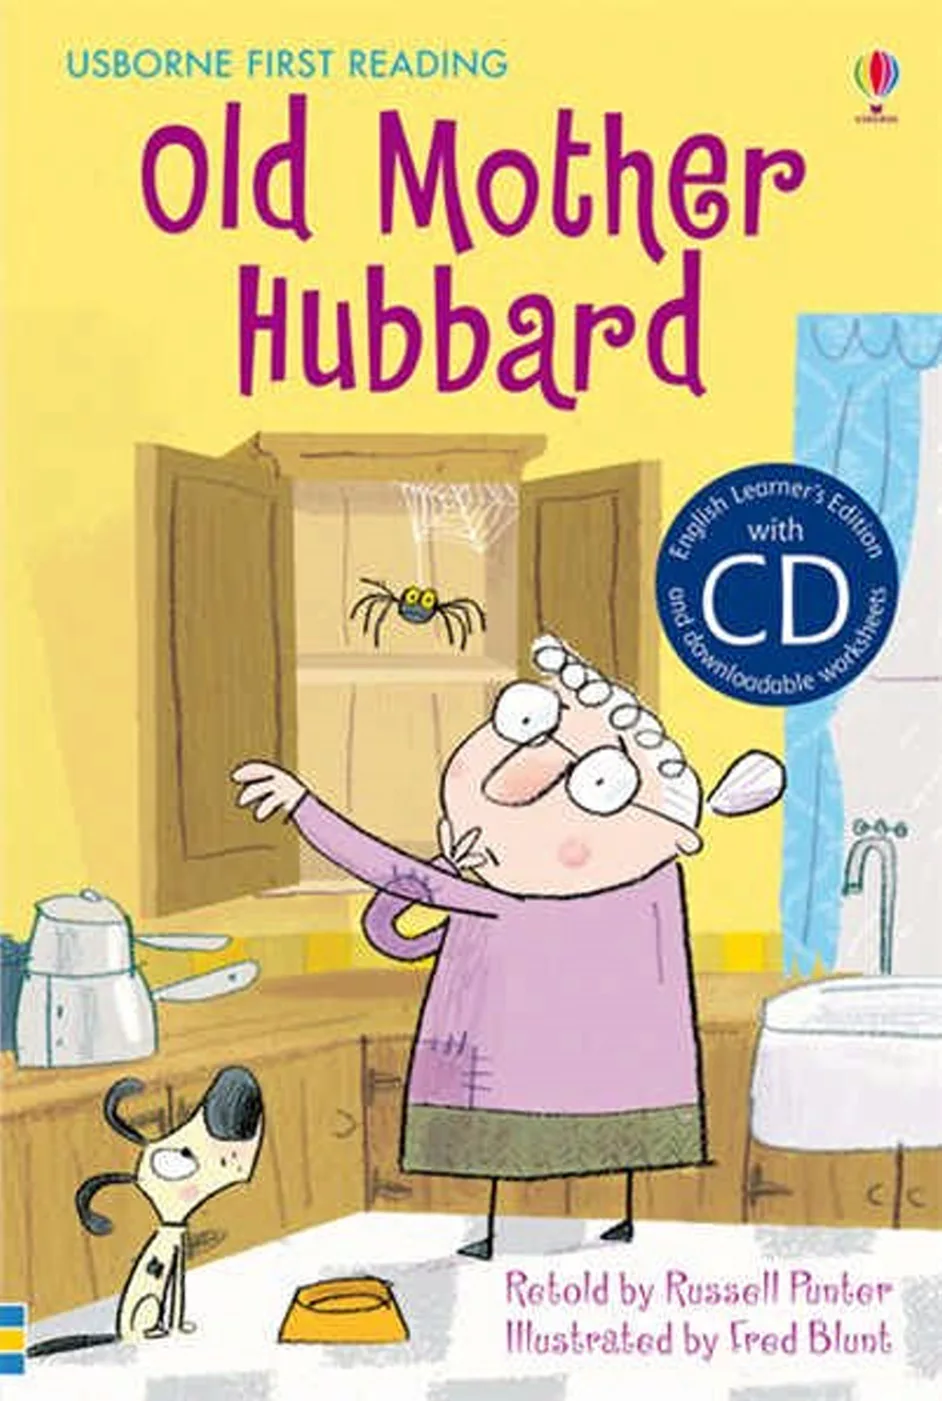 Old Mother Hubbard (with CD) (Usborne English Learners’ Editions: Elementary)